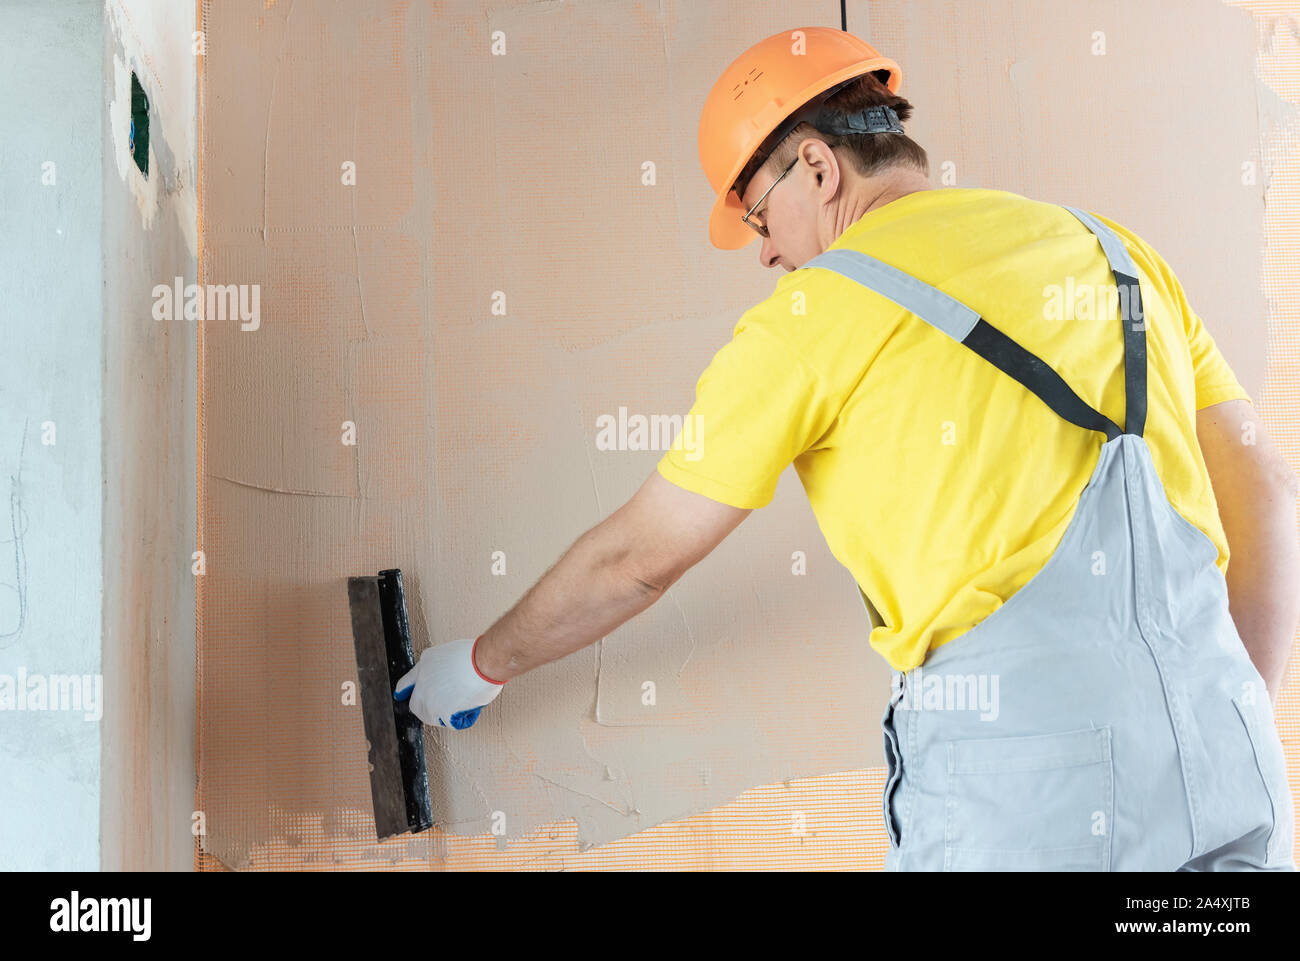 The worker is applying putty on a fiberglass mesh on the wall. He is using a wide spatula. Stock Photo